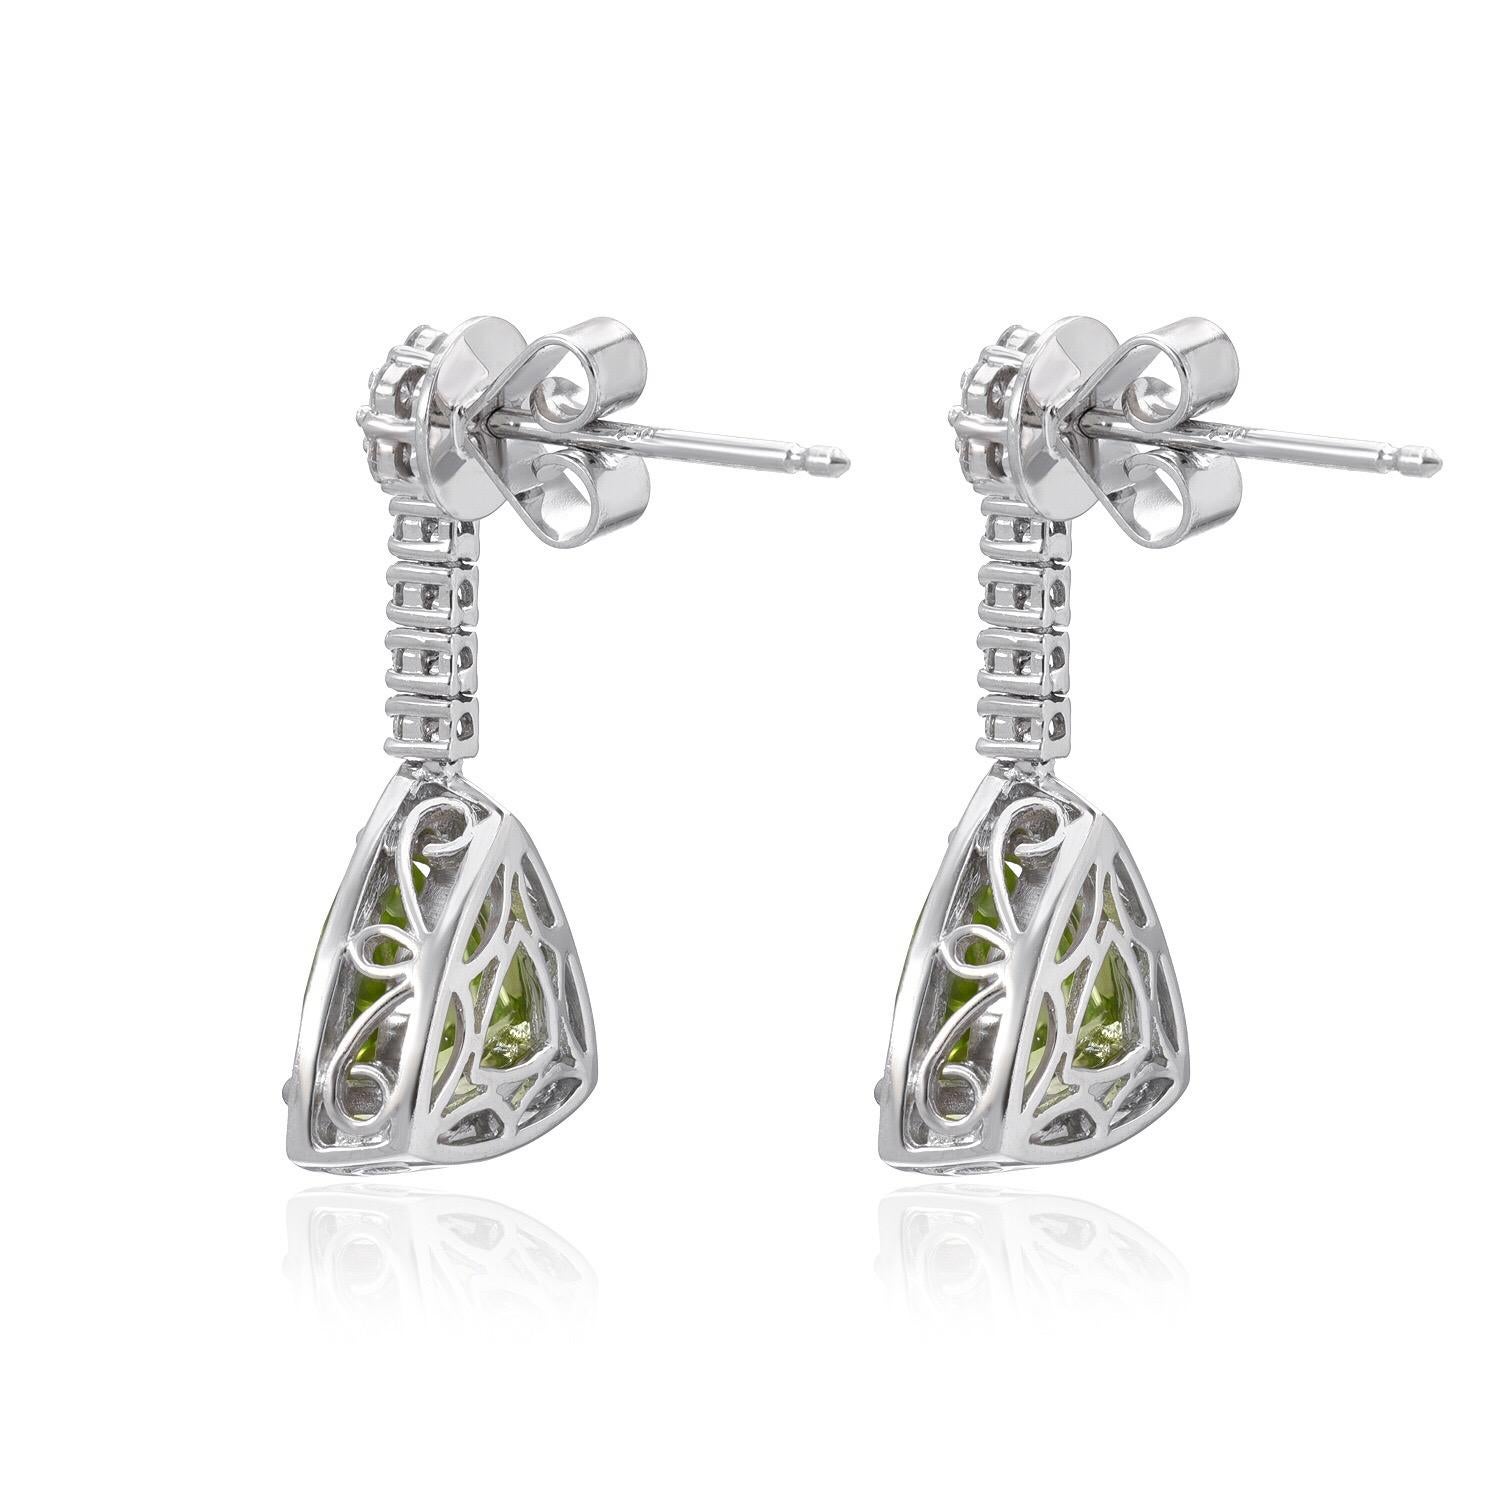 Peridot pair of trillions, weighing a total of 4.23 carats, adorned by round brilliant diamonds weighing a total of 0.77 carats, to comprise this fantastic pair of drop 18K white gold earrings for women.

0.75 inches in length.

Returns are accepted